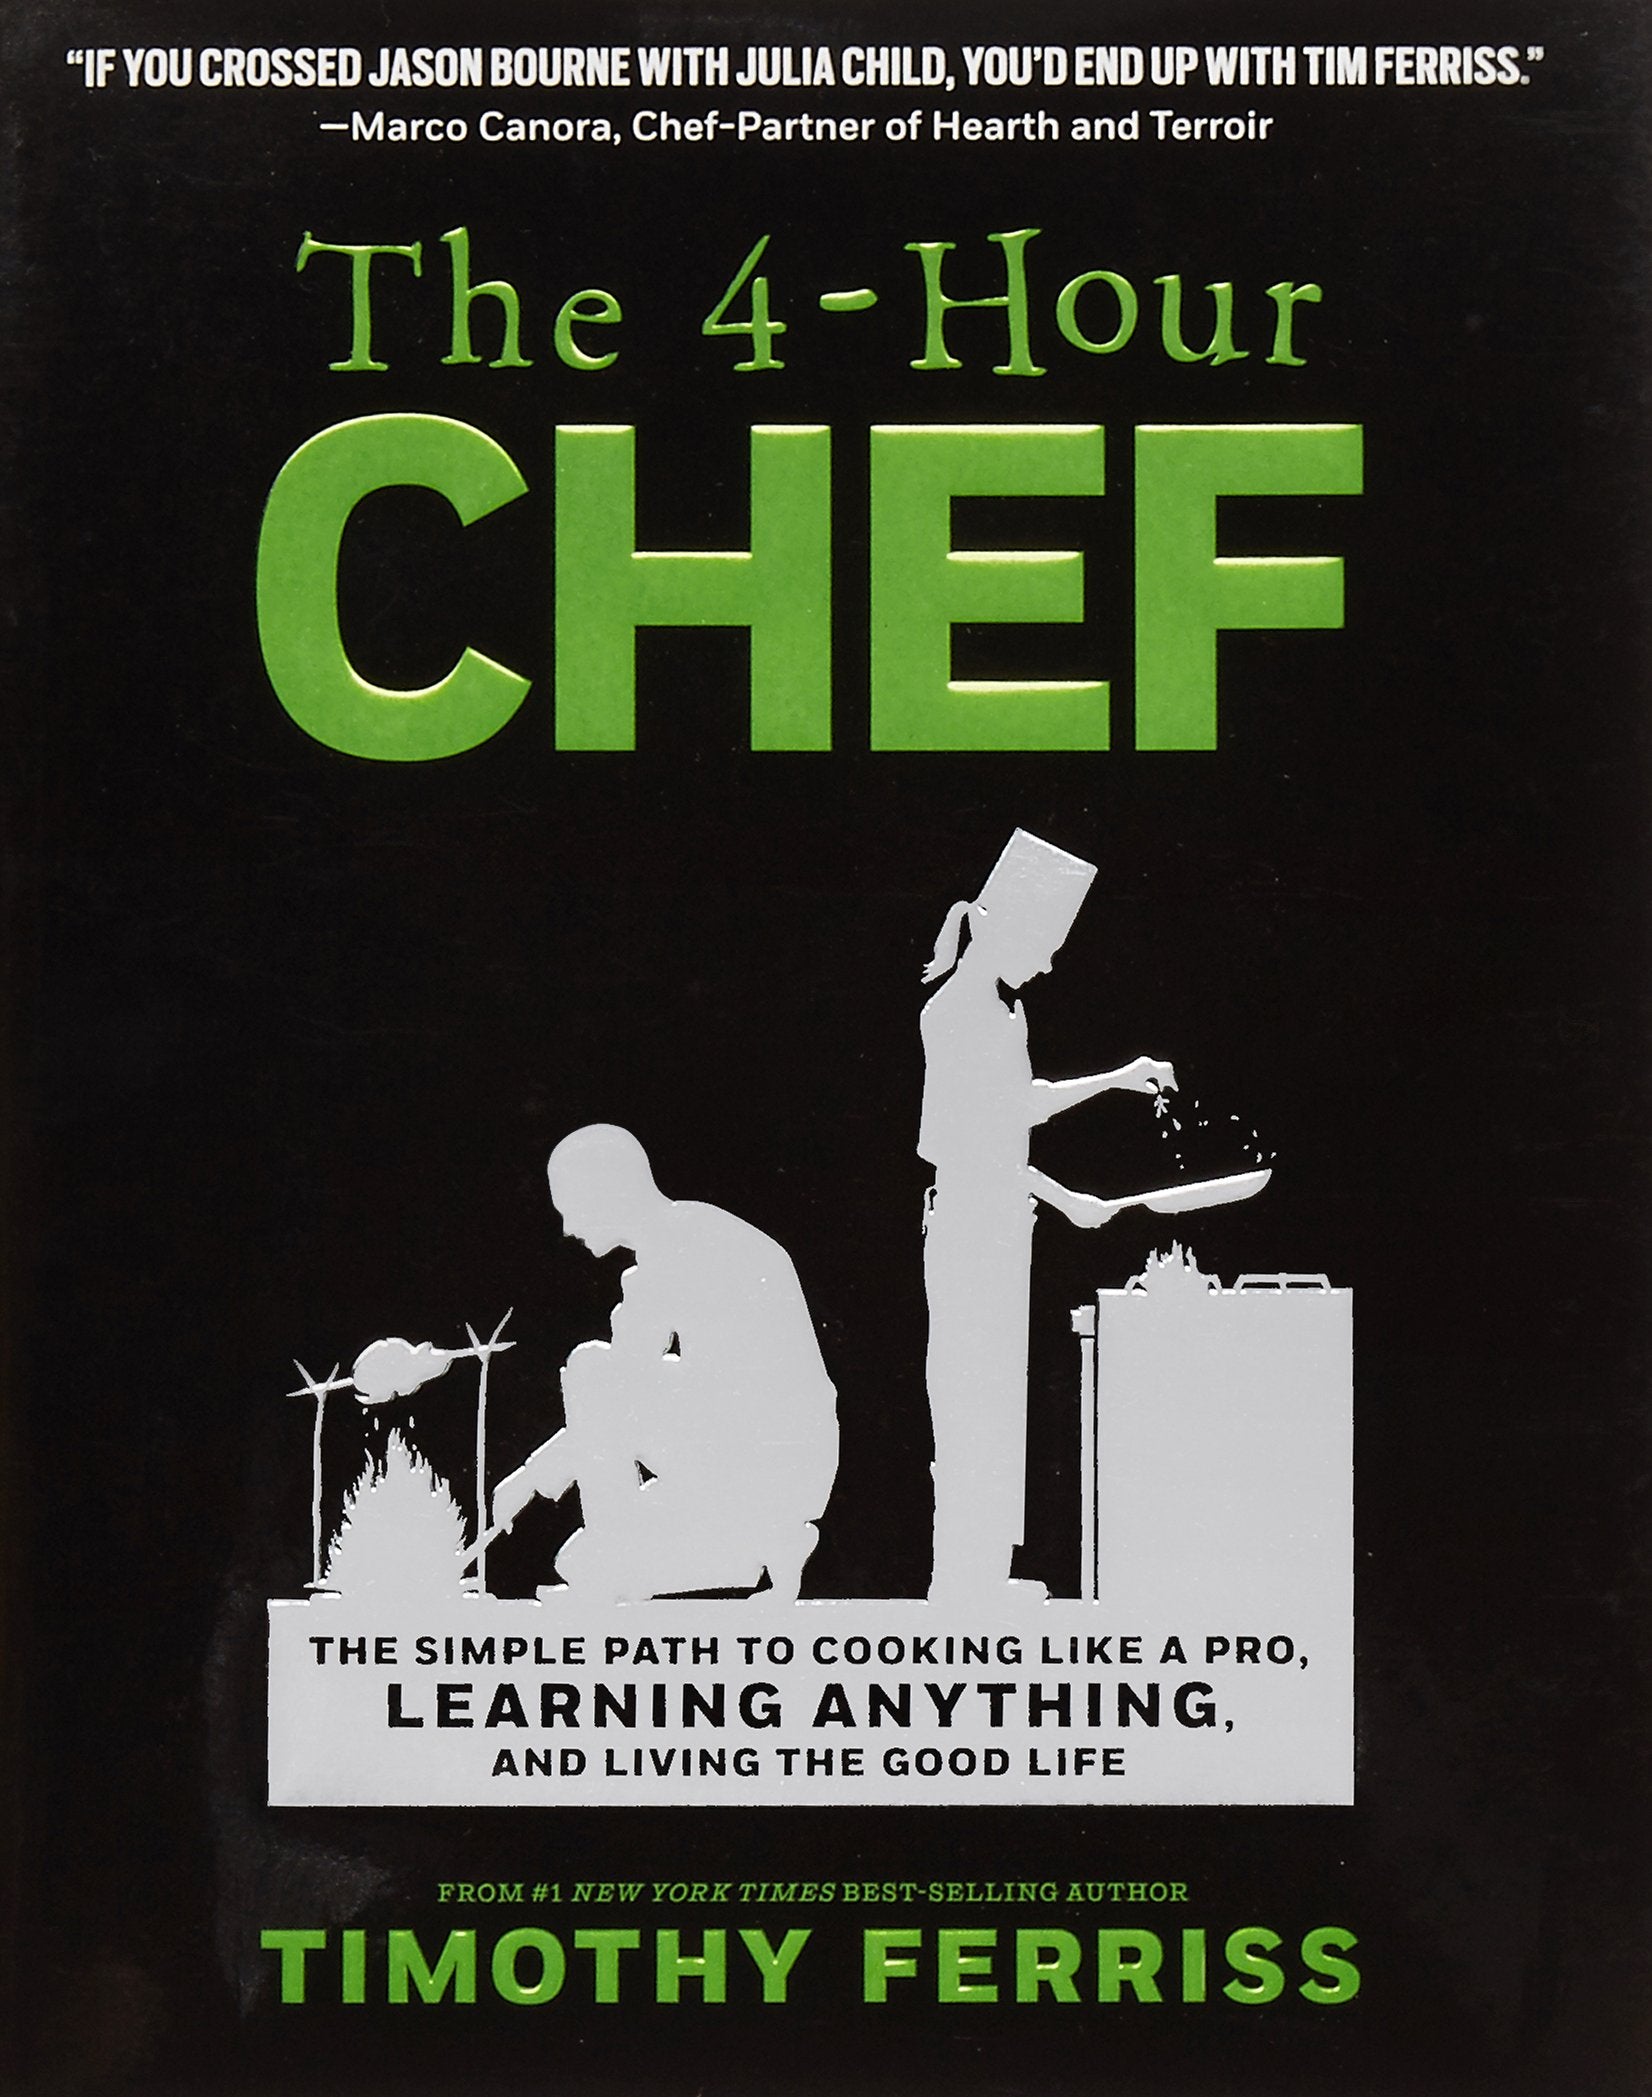 Livre ISBN 0547884591 The 4-Hour Chef: The Simple Path to Cooking Like a Pro, Learning Any Skill & Living the Good Life (Thimothy Ferriss)